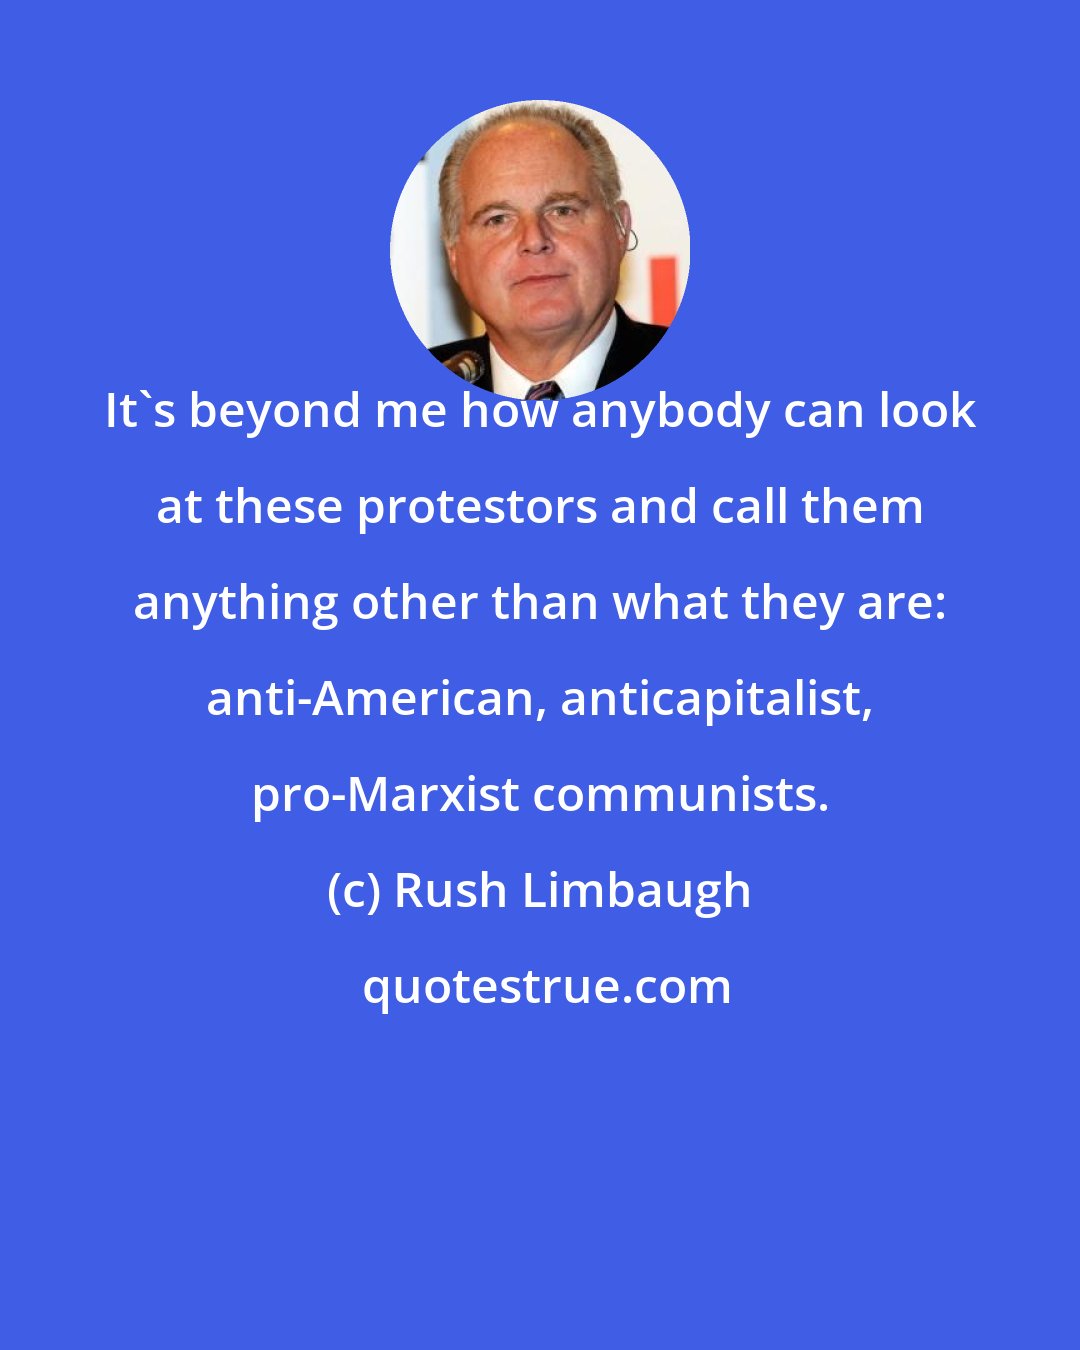 Rush Limbaugh: It's beyond me how anybody can look at these protestors and call them anything other than what they are: anti-American, anticapitalist, pro-Marxist communists.